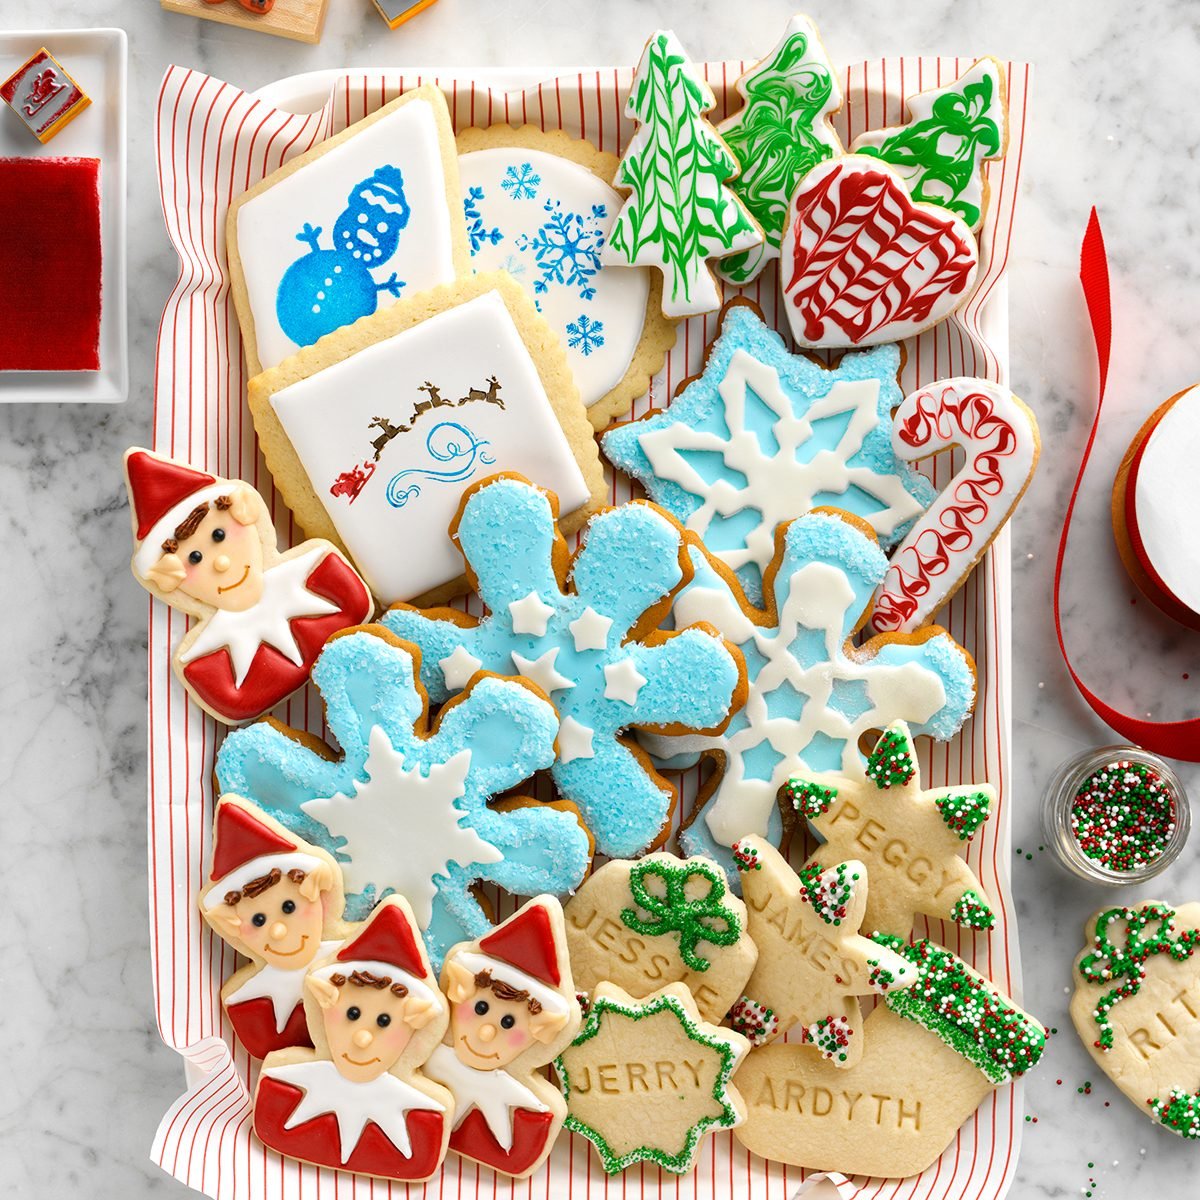 Top 99 decorating christmas cookie ideas - Fun and Festive DIY Projects ...